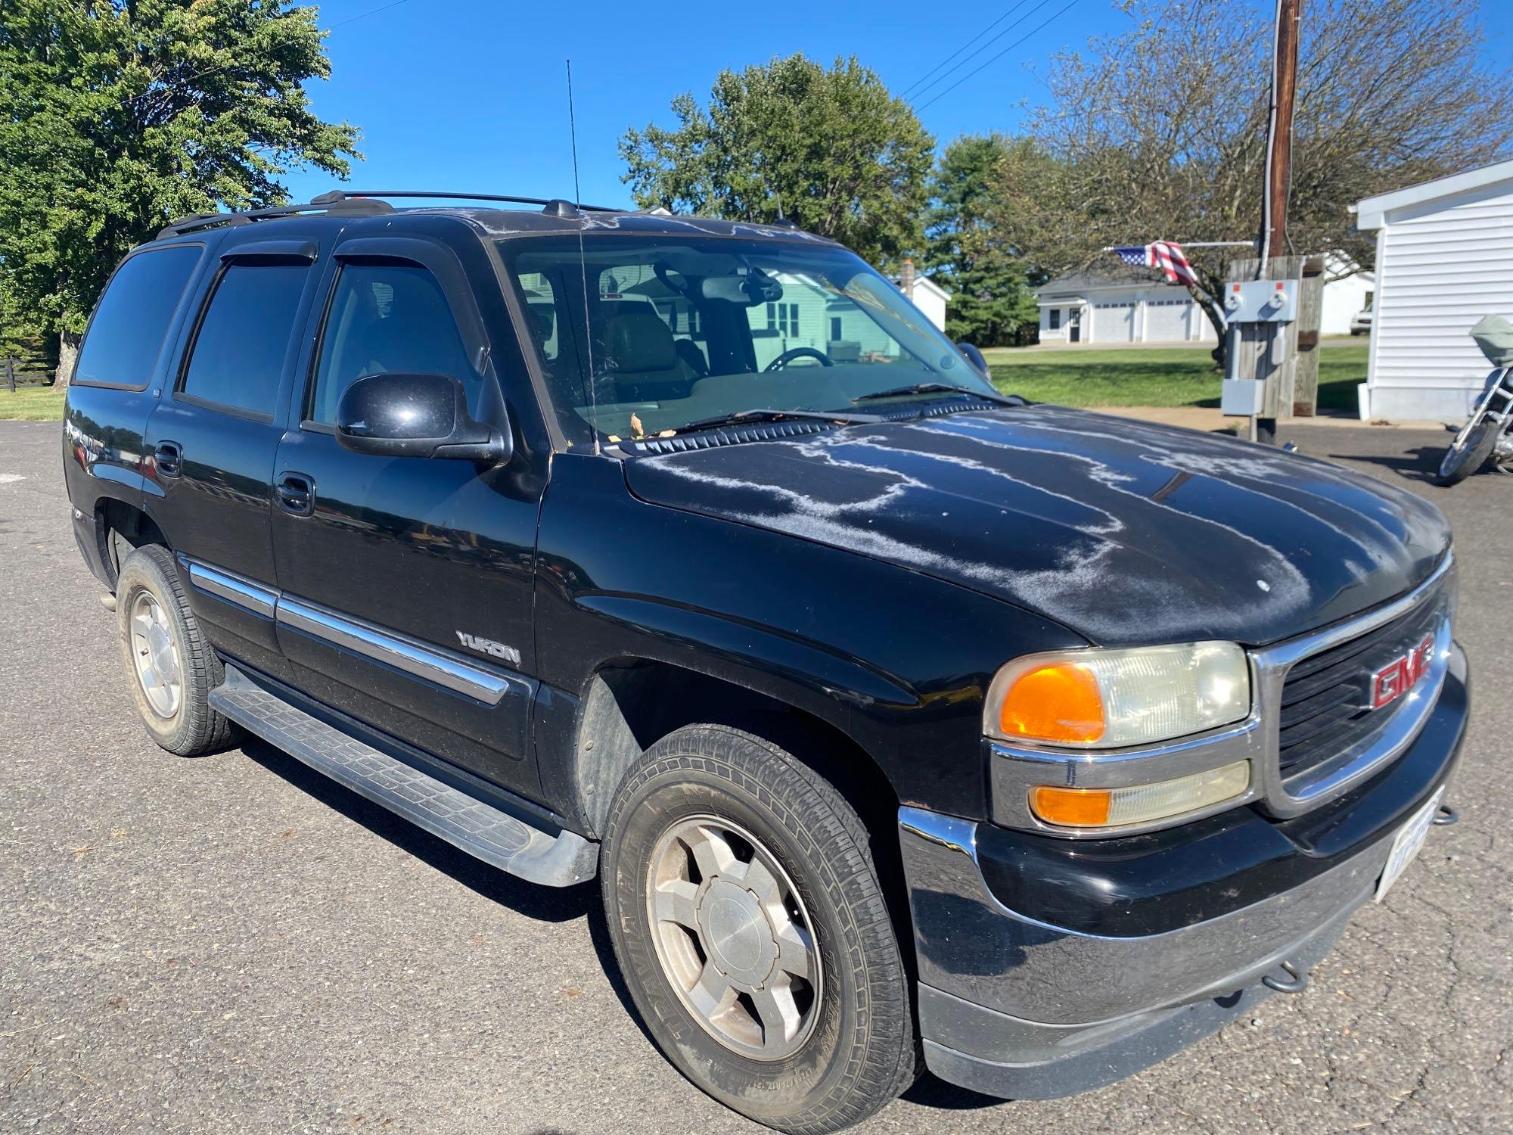 Image for 2005 GMC Yukon, Per Seller Runs and Drives Good, Needs 4X4 Switch, True Mileage Unkown